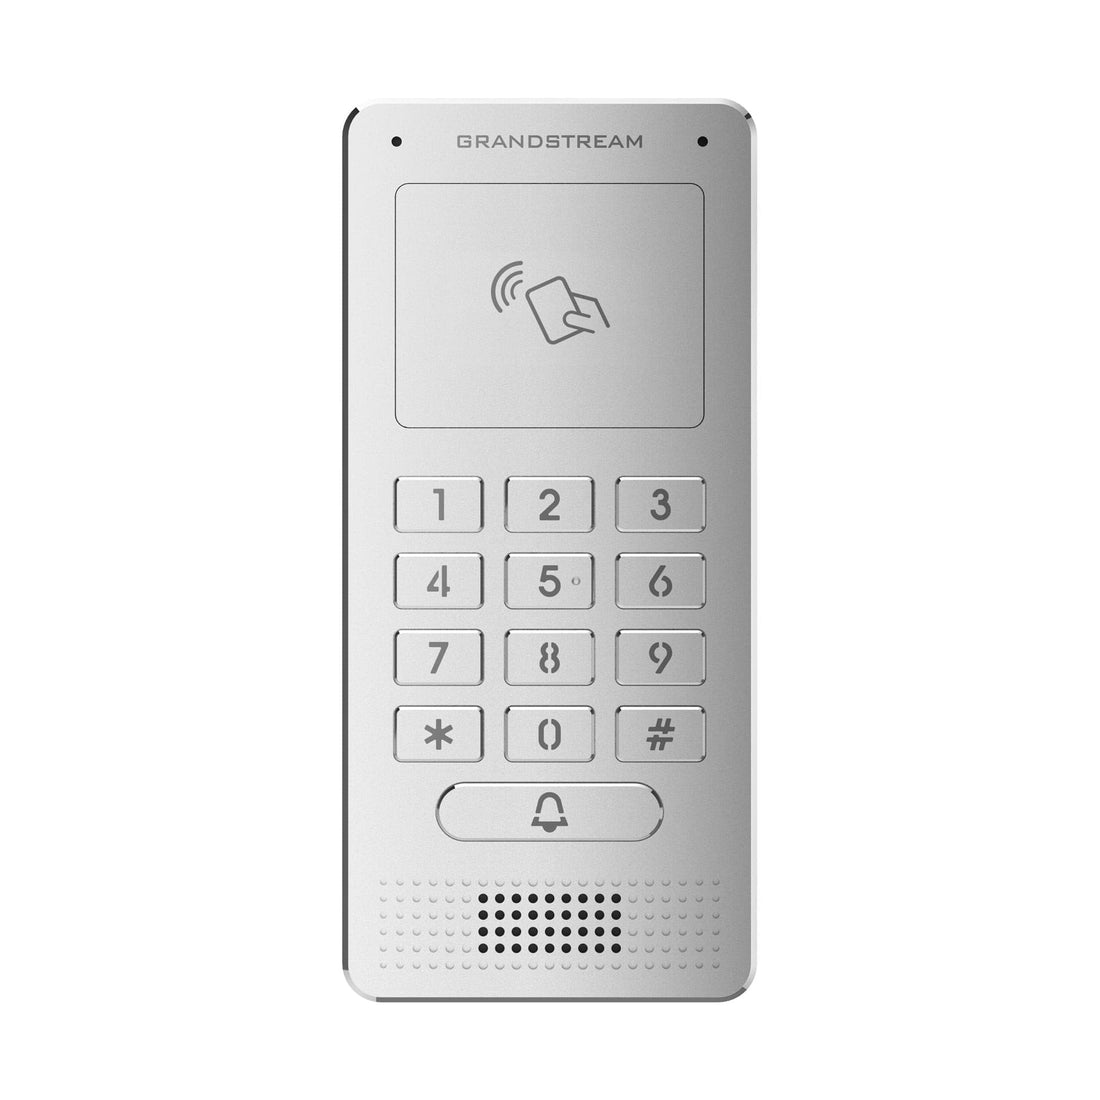 GDS3705 Access and security monitoring system - best price from Maltashopper.com GDS3705